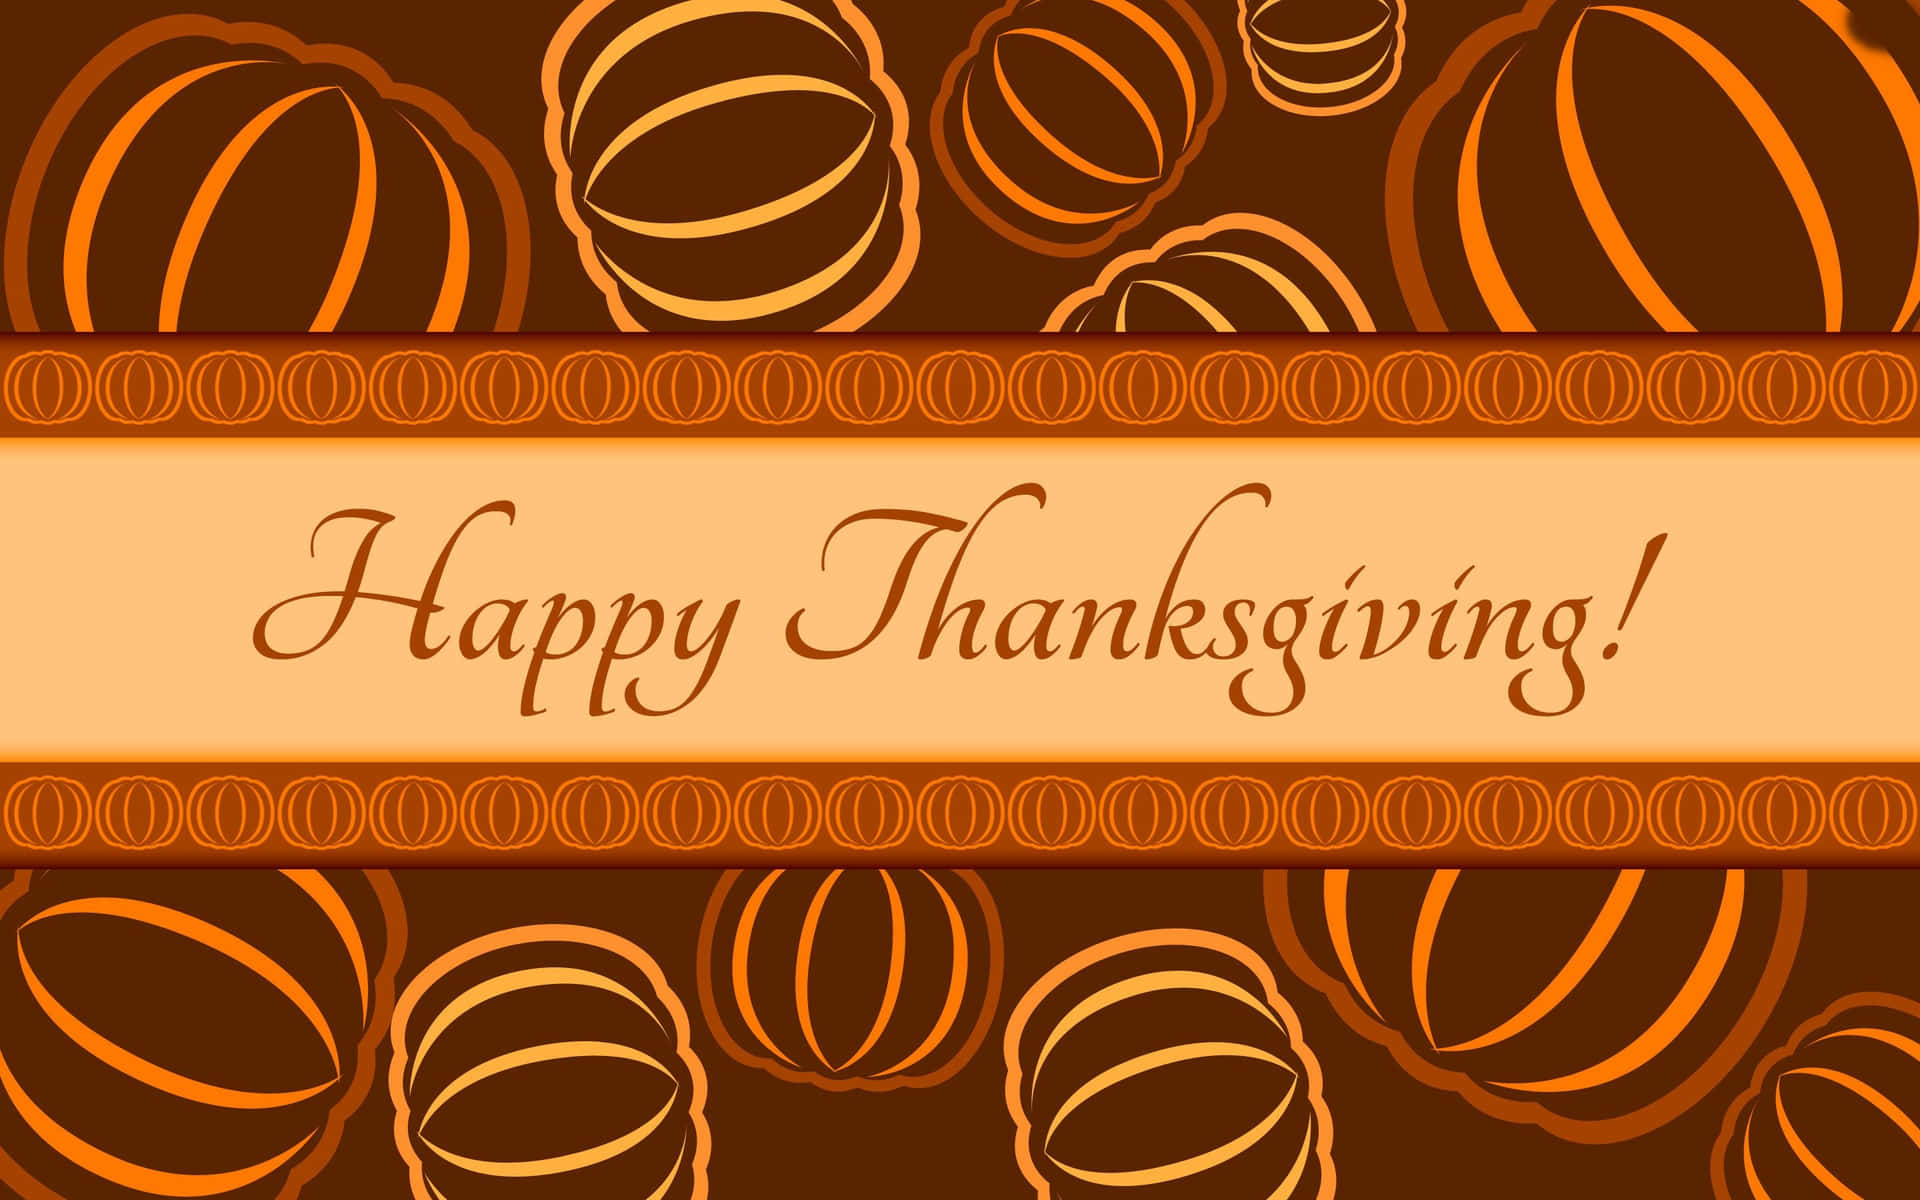 Happy Thanksgiving Greeting Card Pumpkin Outline Wallpaper